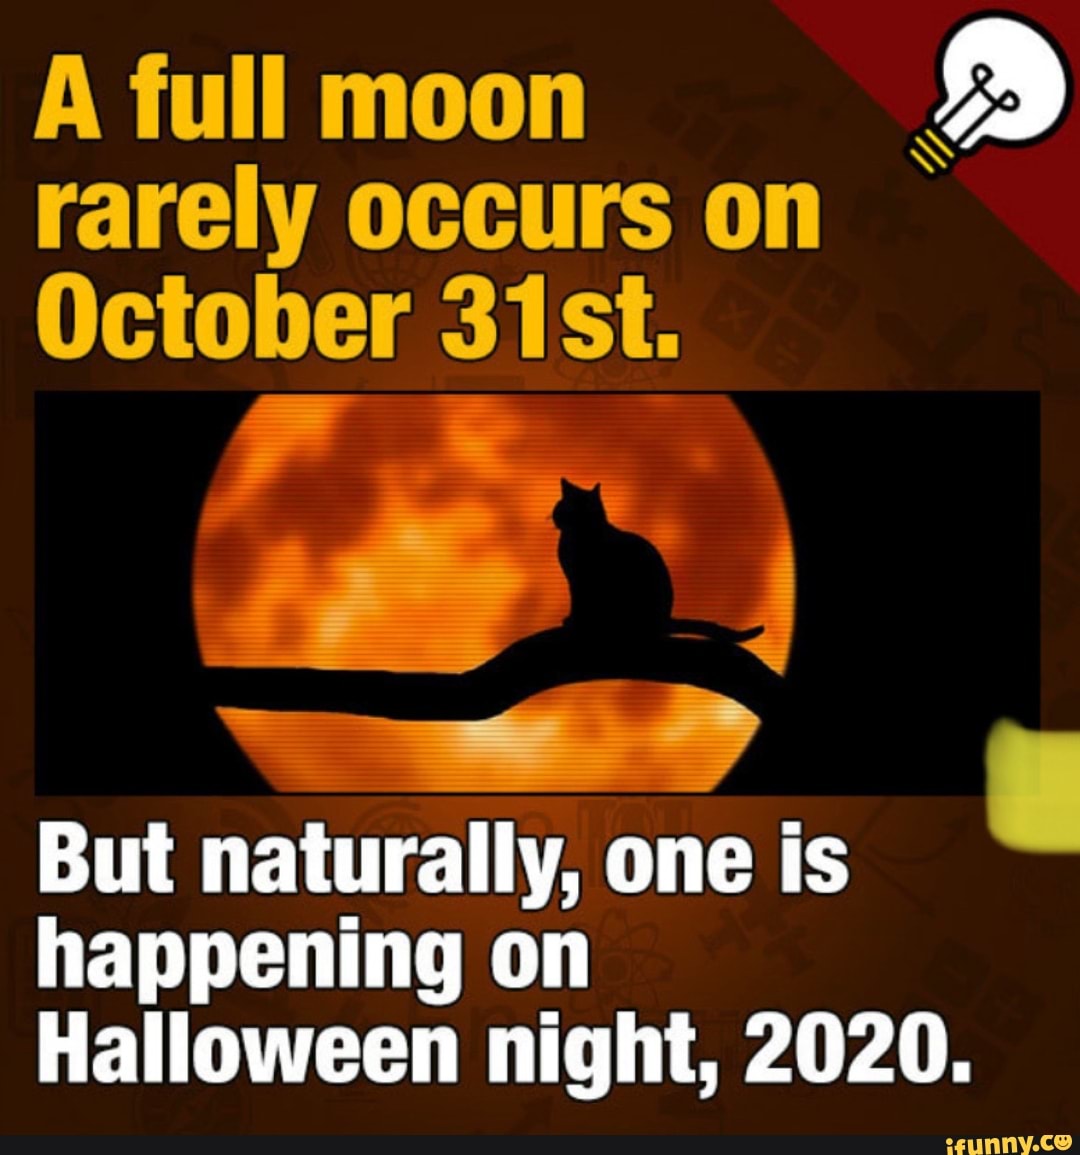 A full moon 2 rarely occurs on October 31st. But naturally, one is